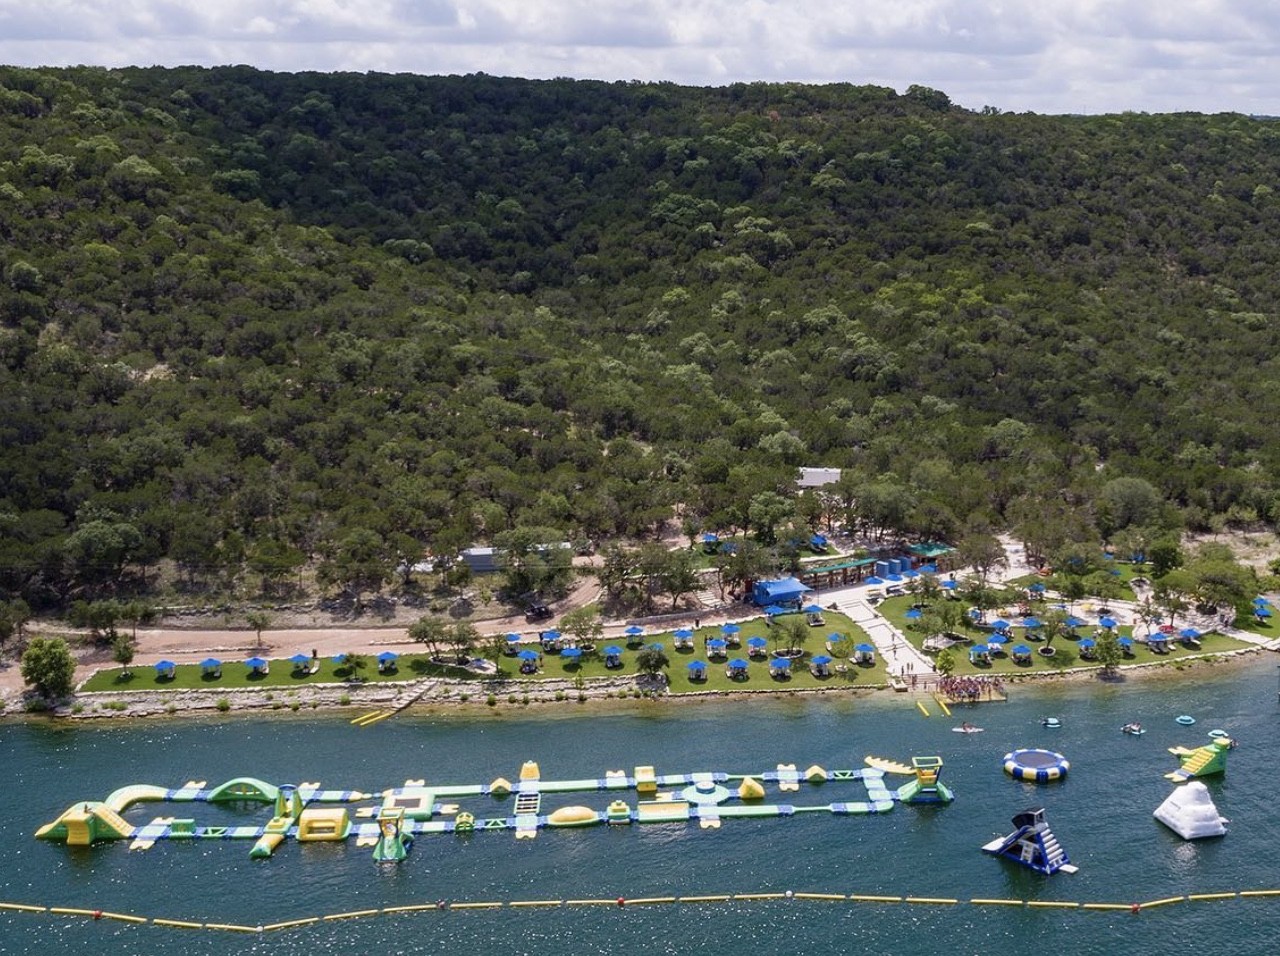 Lake Travis Waterloo Adventures
14529 Pocohontas Trail, Leander, (512) 614-1979, waterlooadventures.com
Just outside of Austin you’ll find one of the most badass outdoor attractions in the area. This water park is floating — meaning that it’s on water! You’ll get to bounce off the slides and jump around the obstacle course and straight into the water of Lake Travis. What more could you ask for?